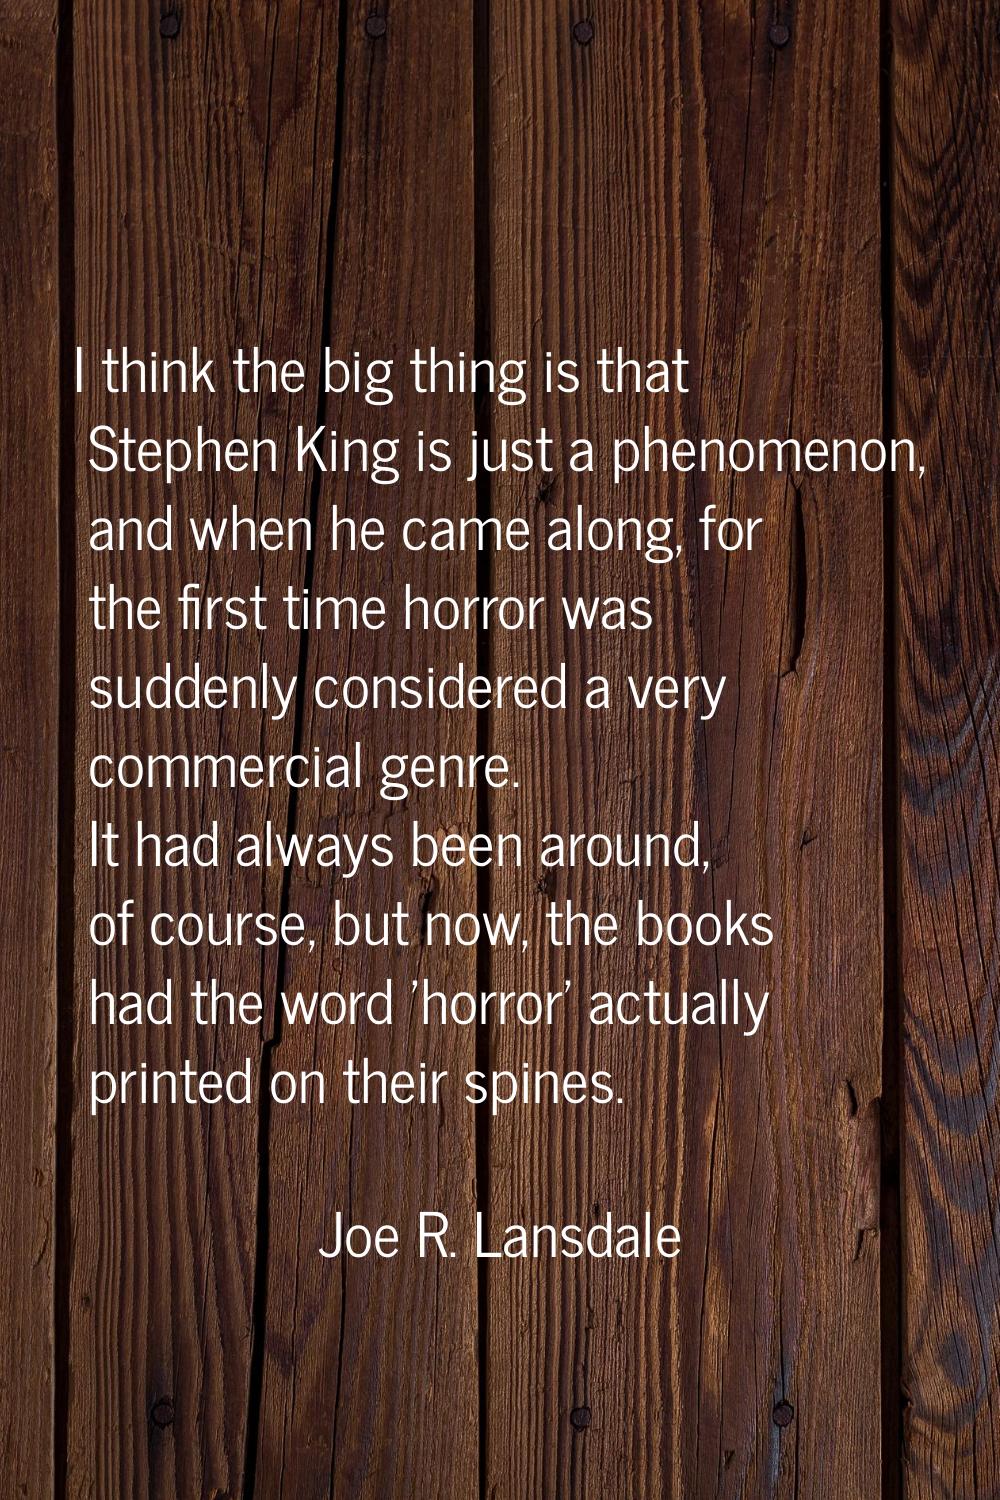 I think the big thing is that Stephen King is just a phenomenon, and when he came along, for the fi